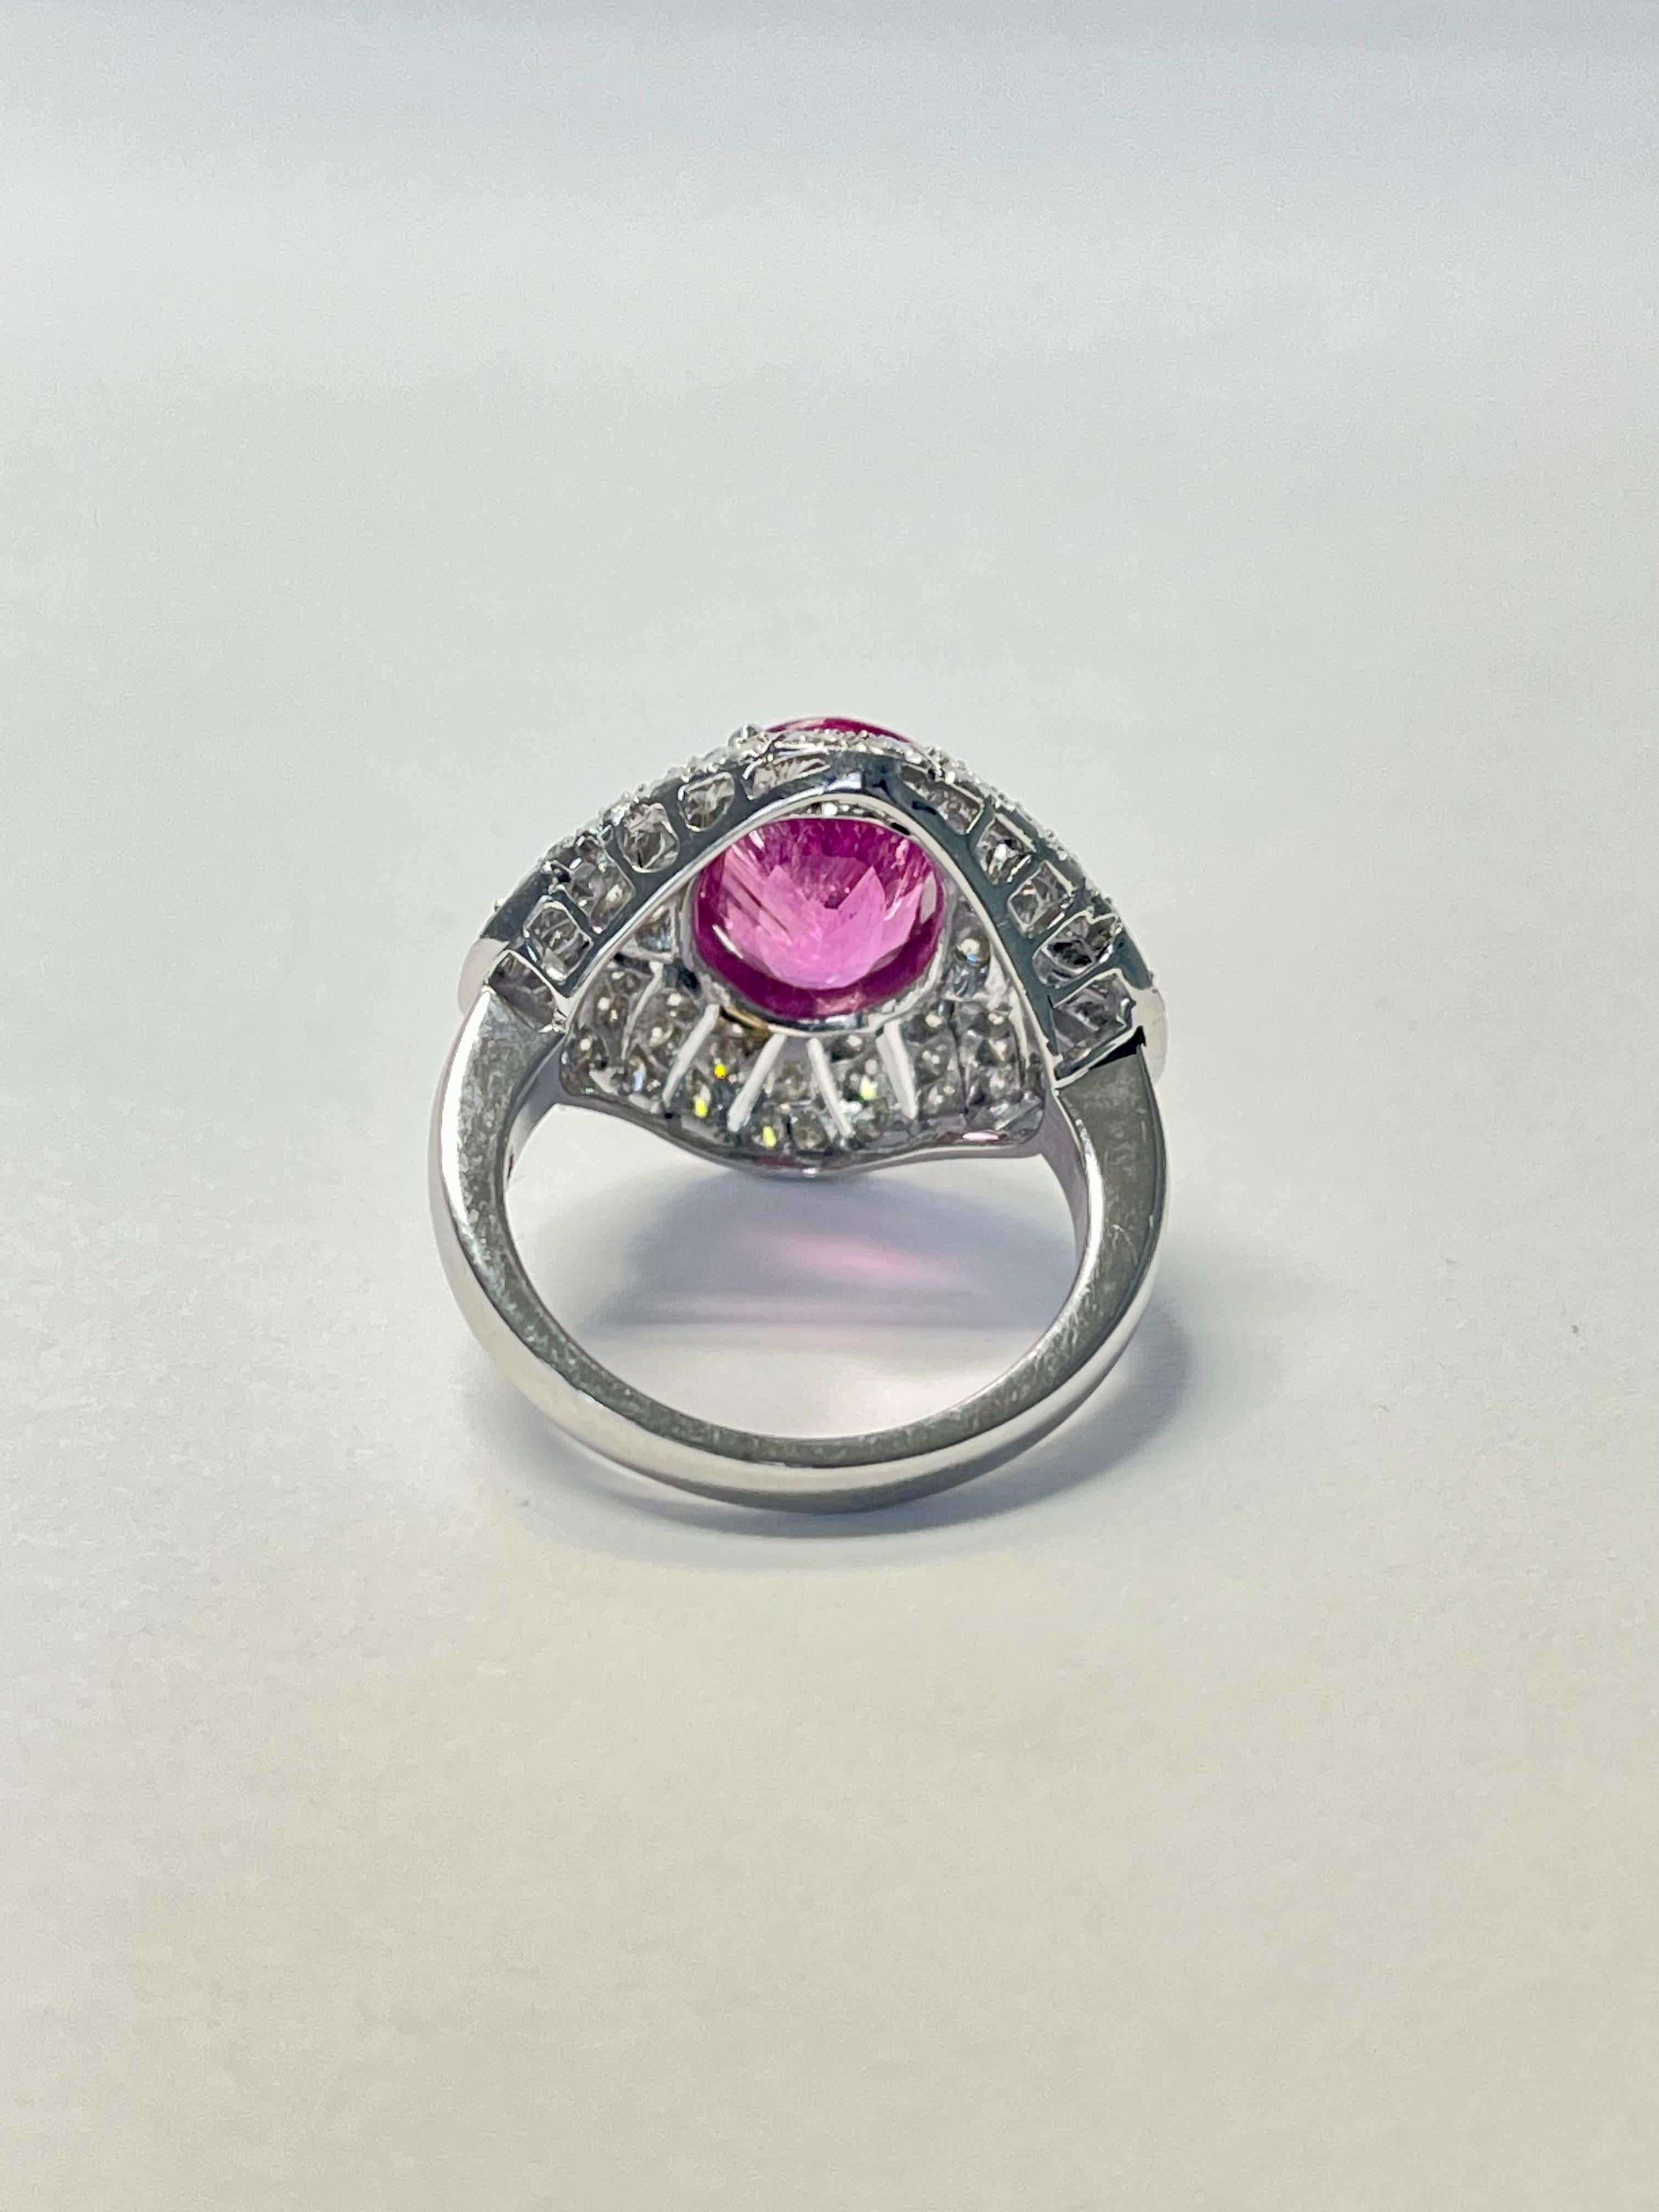 1920 Art Deco Diamond and Oval Rubellite Engagement Ring in 18K White Gold In New Condition For Sale In New York, NY